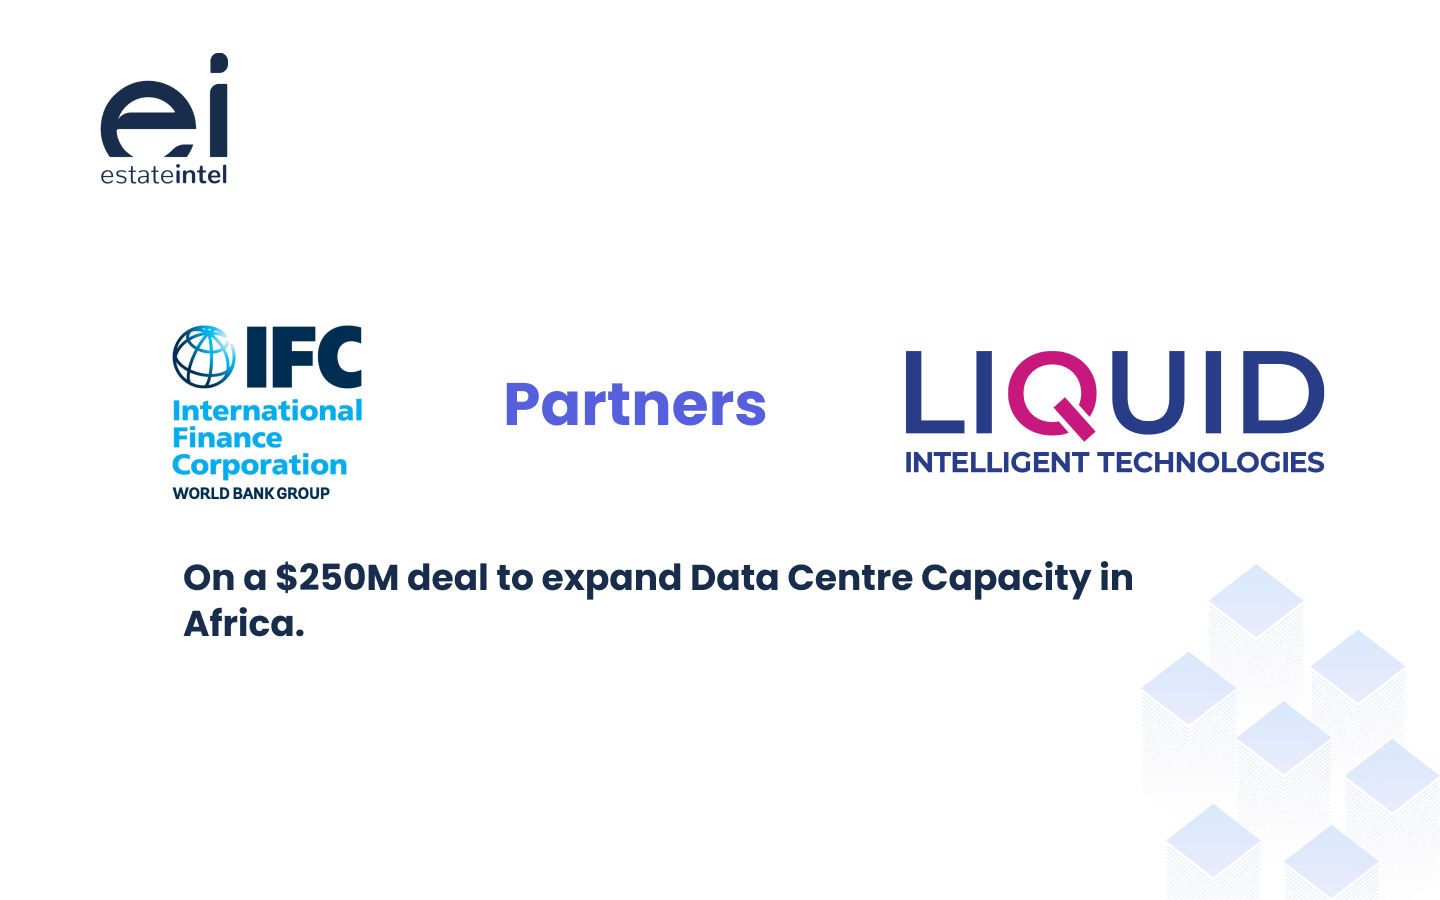 IFC Partners with Liquid Technologies on a $250m deal to expand Data Centre Capacity in Africa.